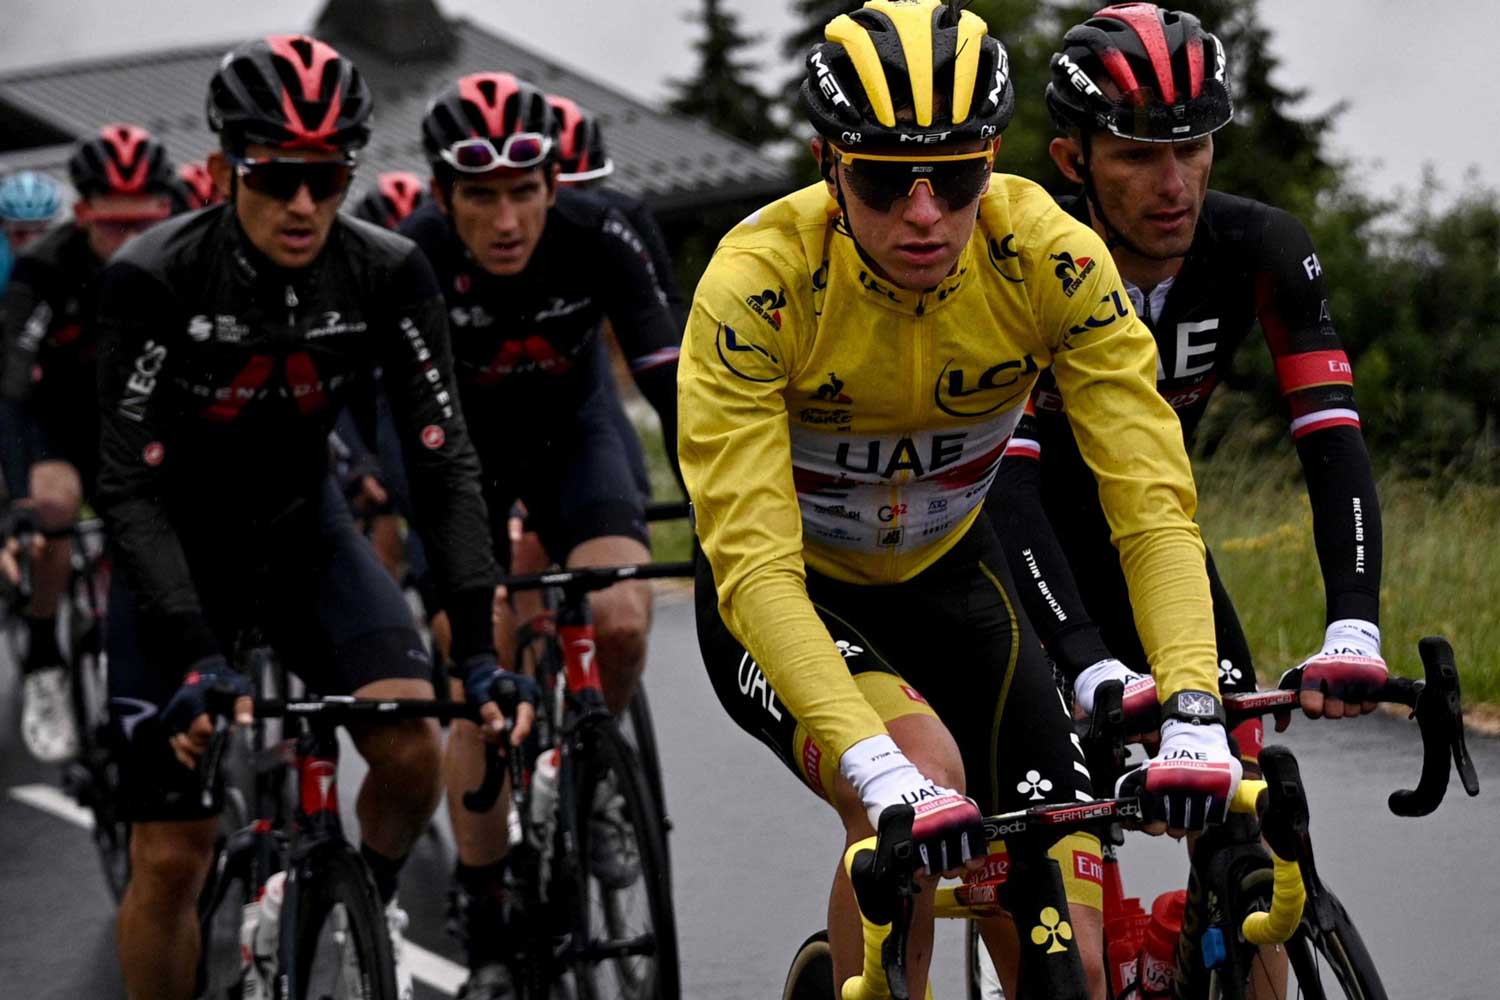 UAE cyclist, Tadej Pogačar w,inner of Tour de France 2020, leading out in front in yellow at Tour de France 2021 (Image: Getty)